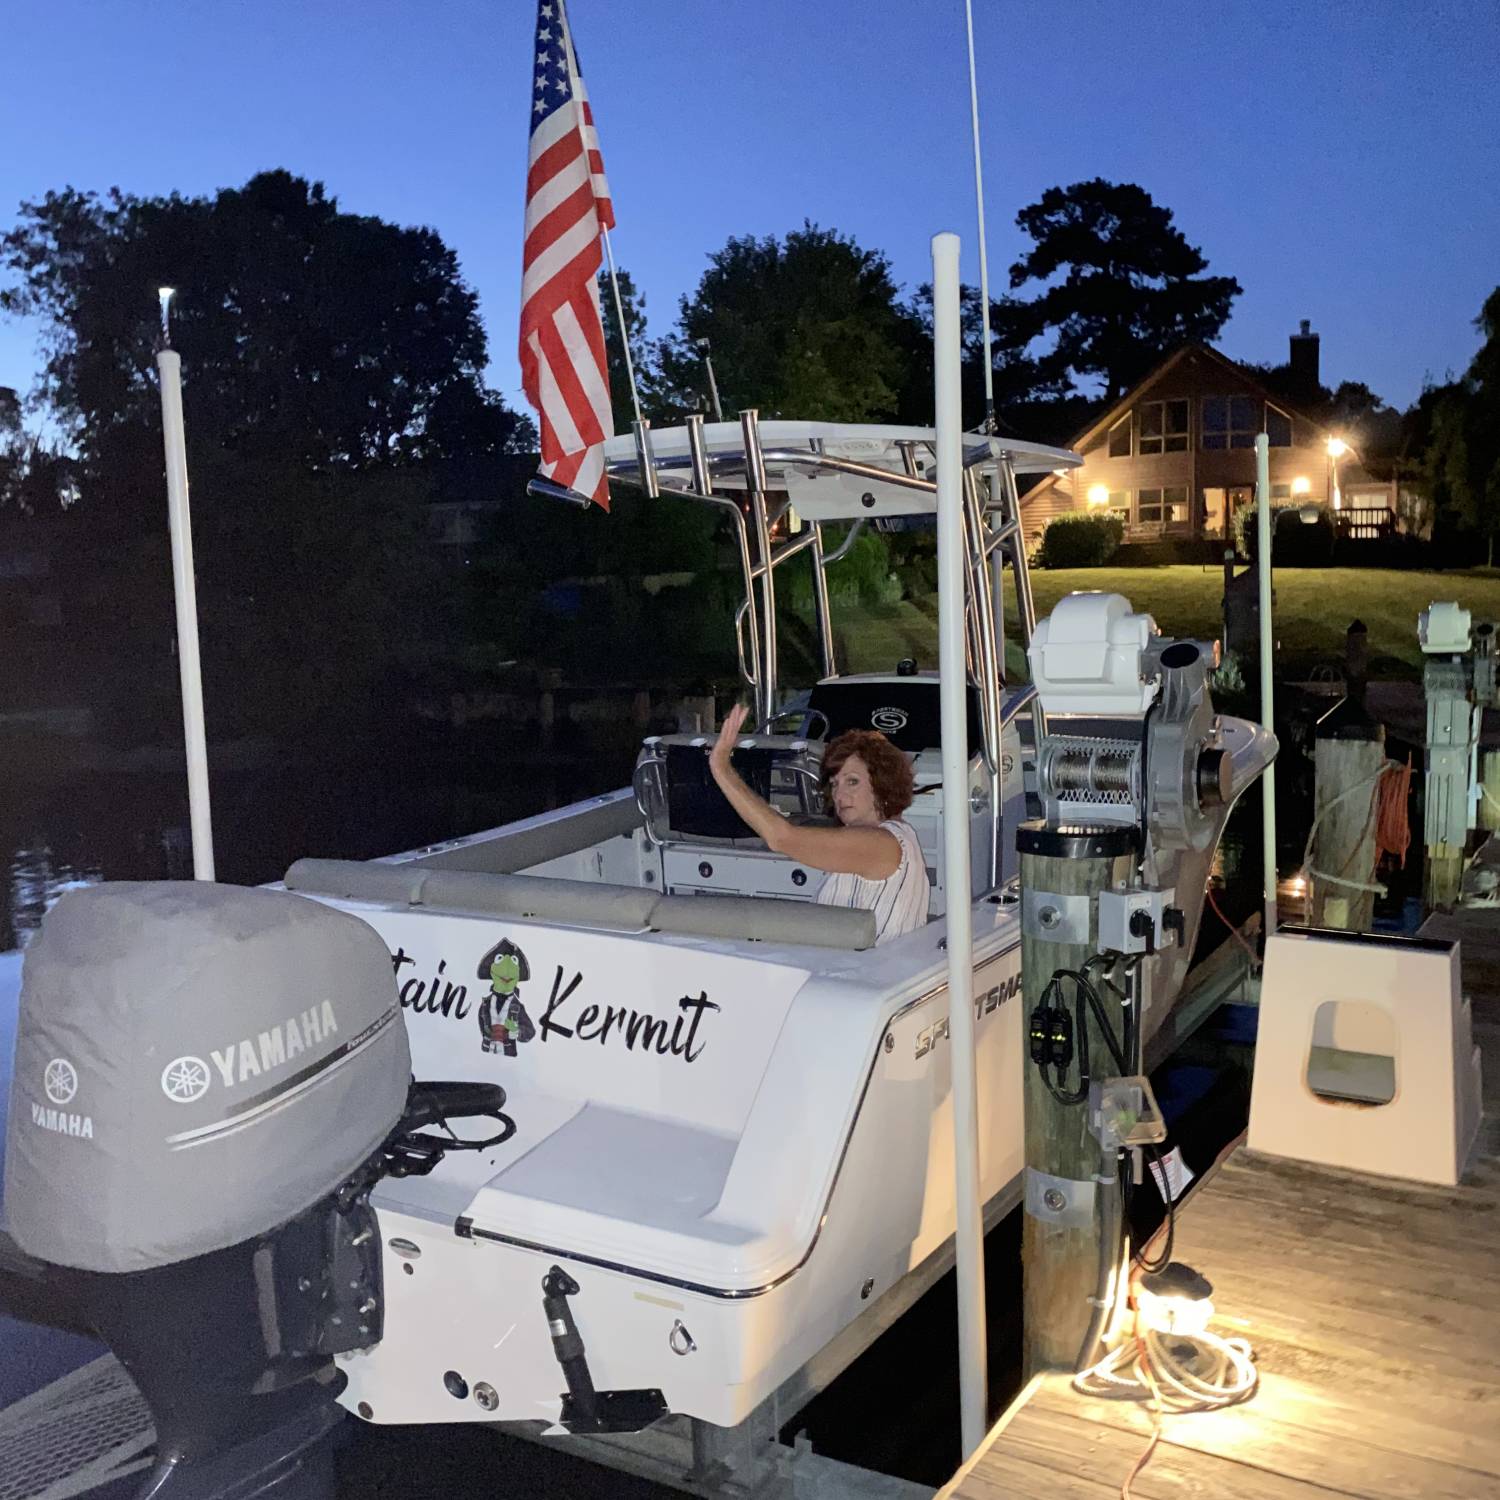 Title: Good Times - On board their Sportsman Heritage 231 Center Console - Location: Solomons Island. Participating in the Photo Contest #SportsmanOctober